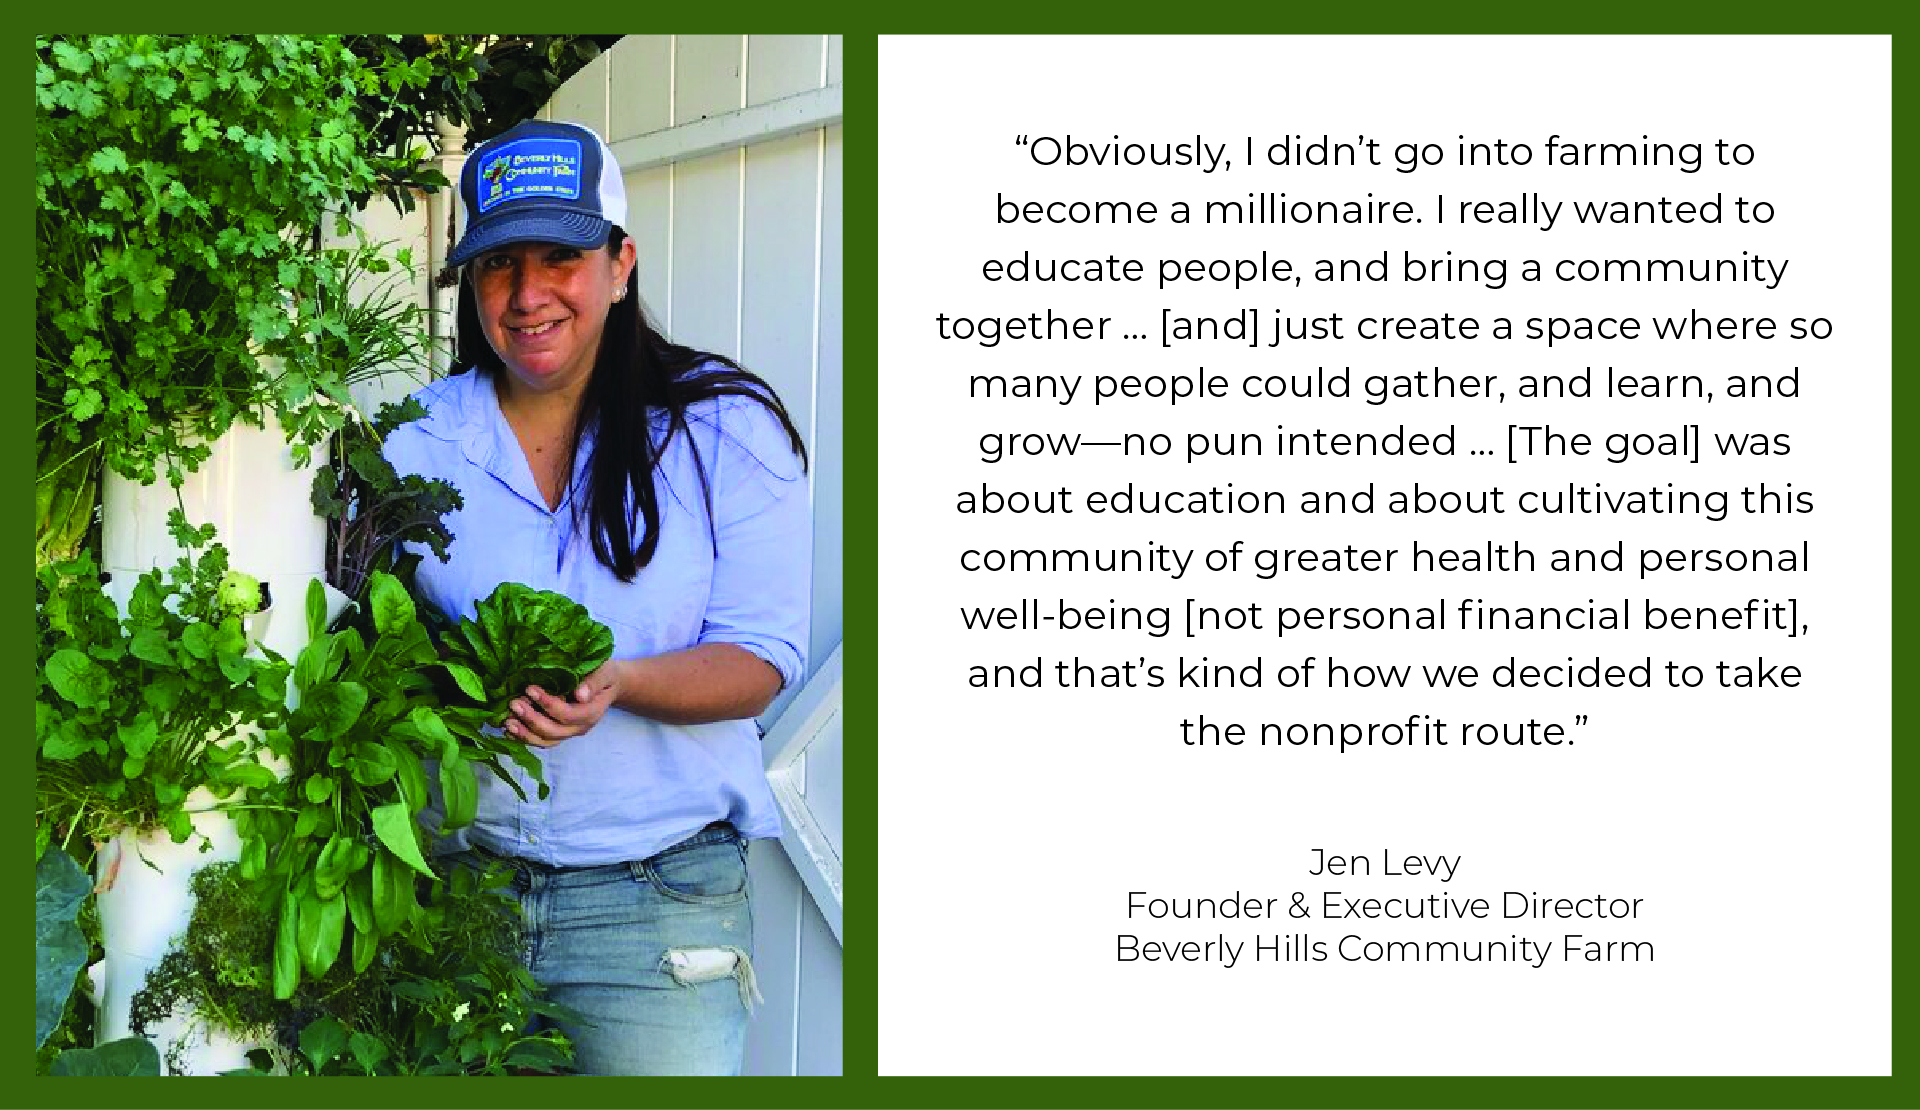 Jen Levy - Founder & Executive Director of Beverly Hills Community Farm